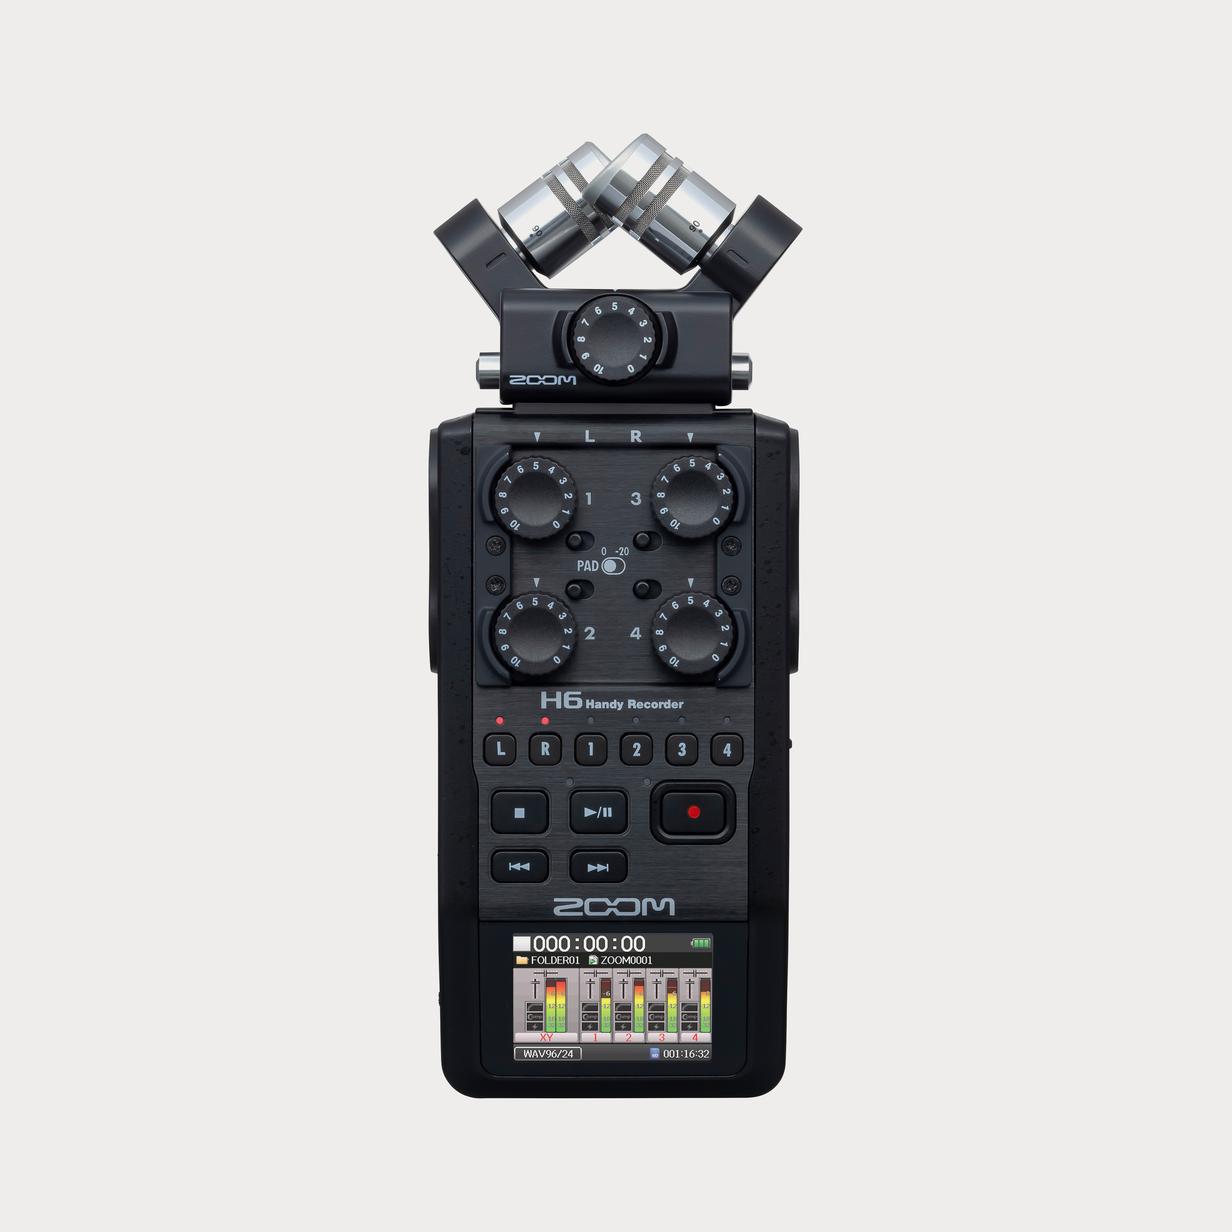 Moment zoom ZH6 AB H6 Handy Recorder All Black 01